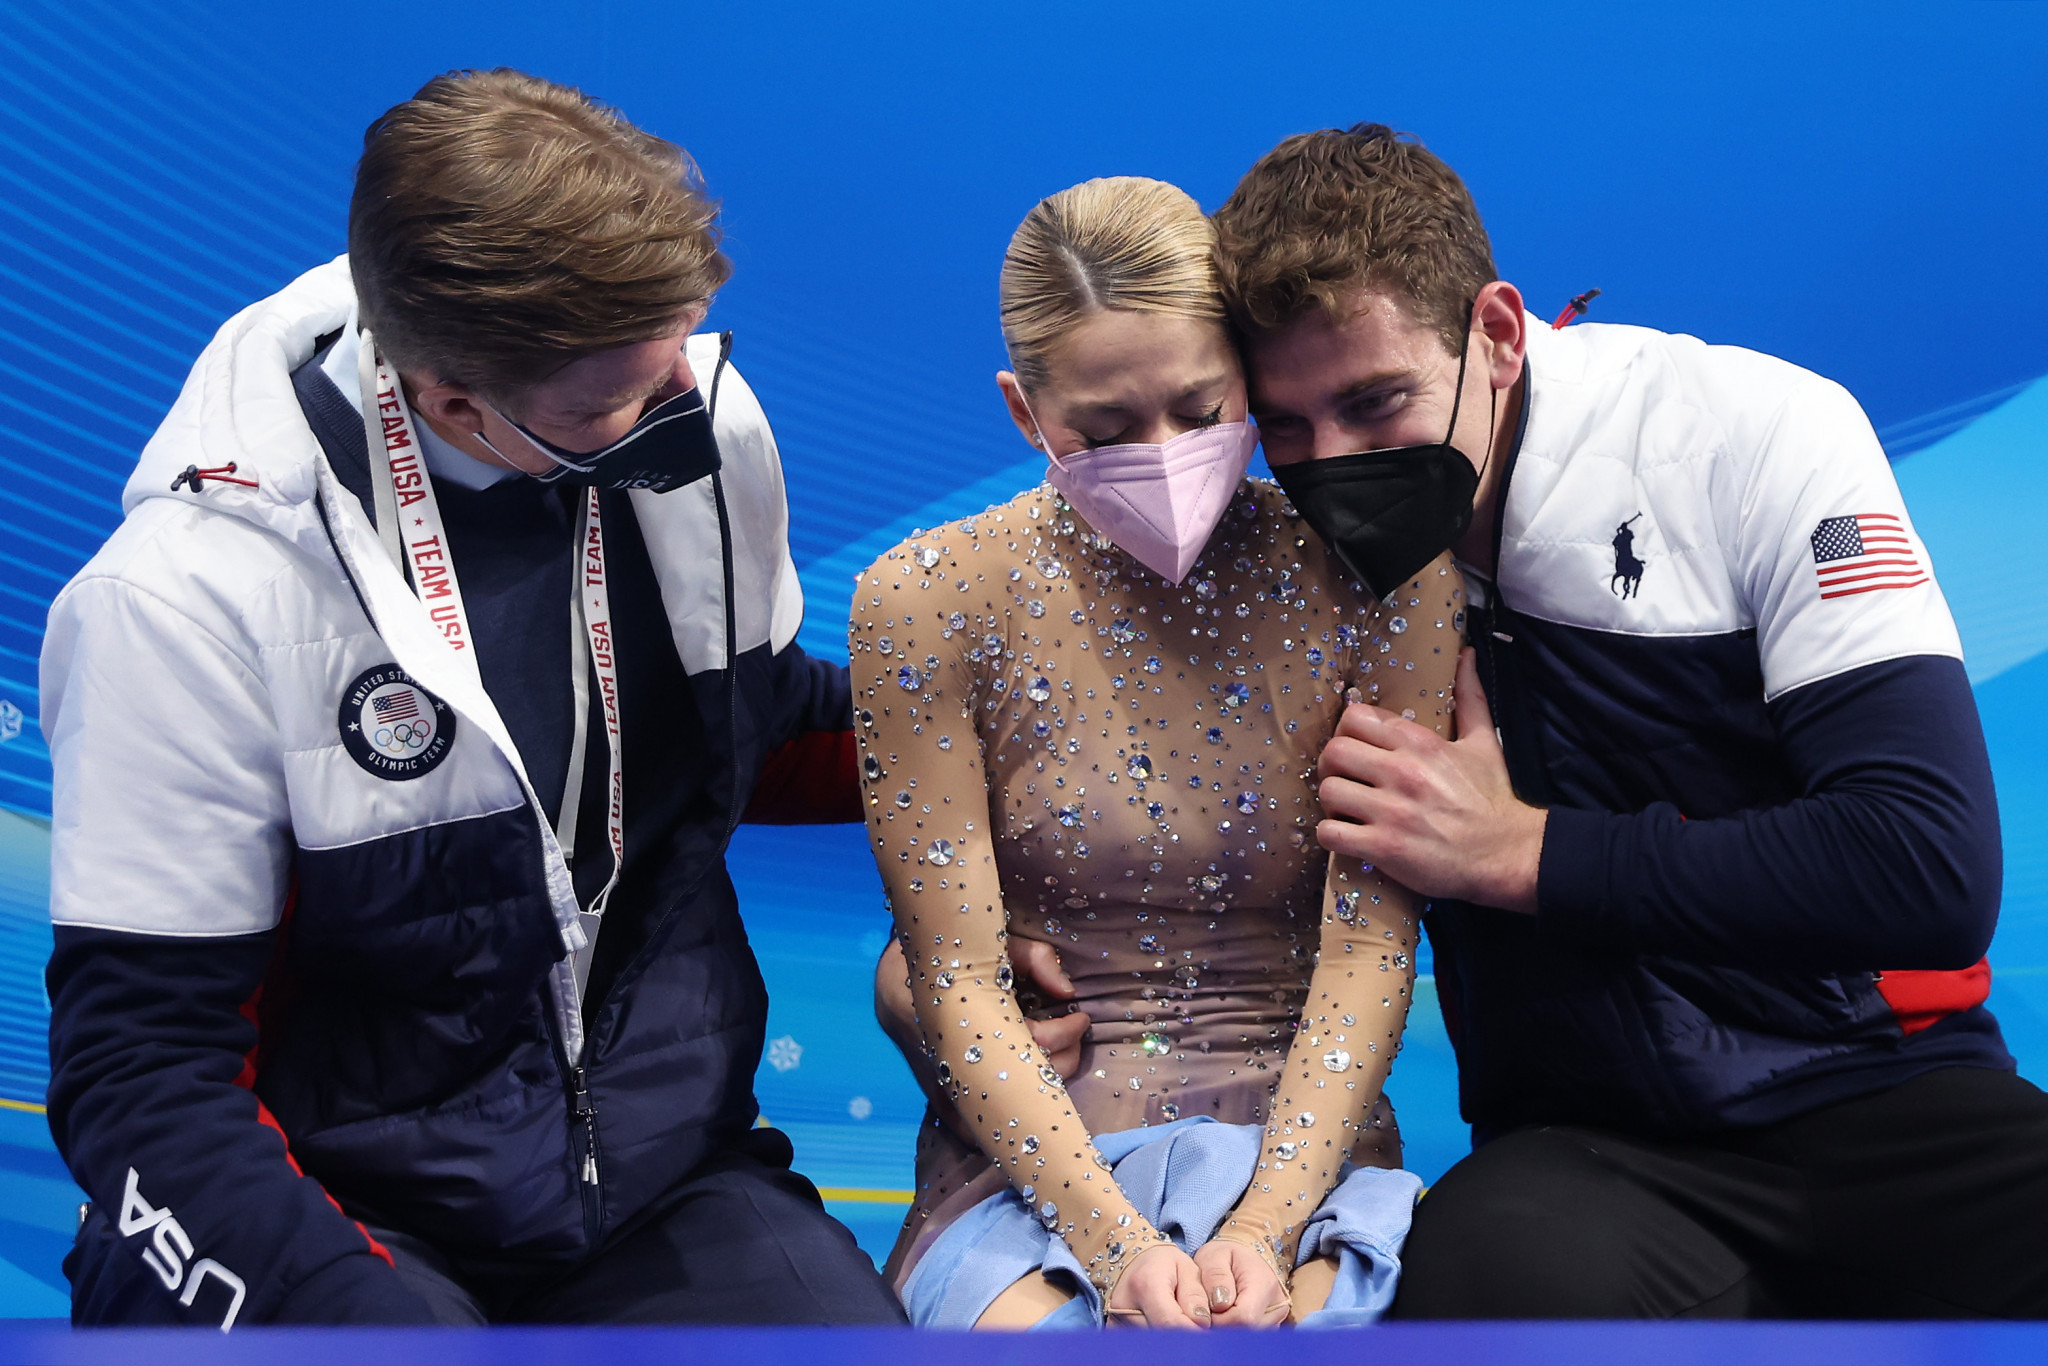 Pairs skaters Alexa Knierim, centre, and Brandon Frazier, right, have been told their use of the track was a "blatant and purposeful infringement of copyright" © Getty Images